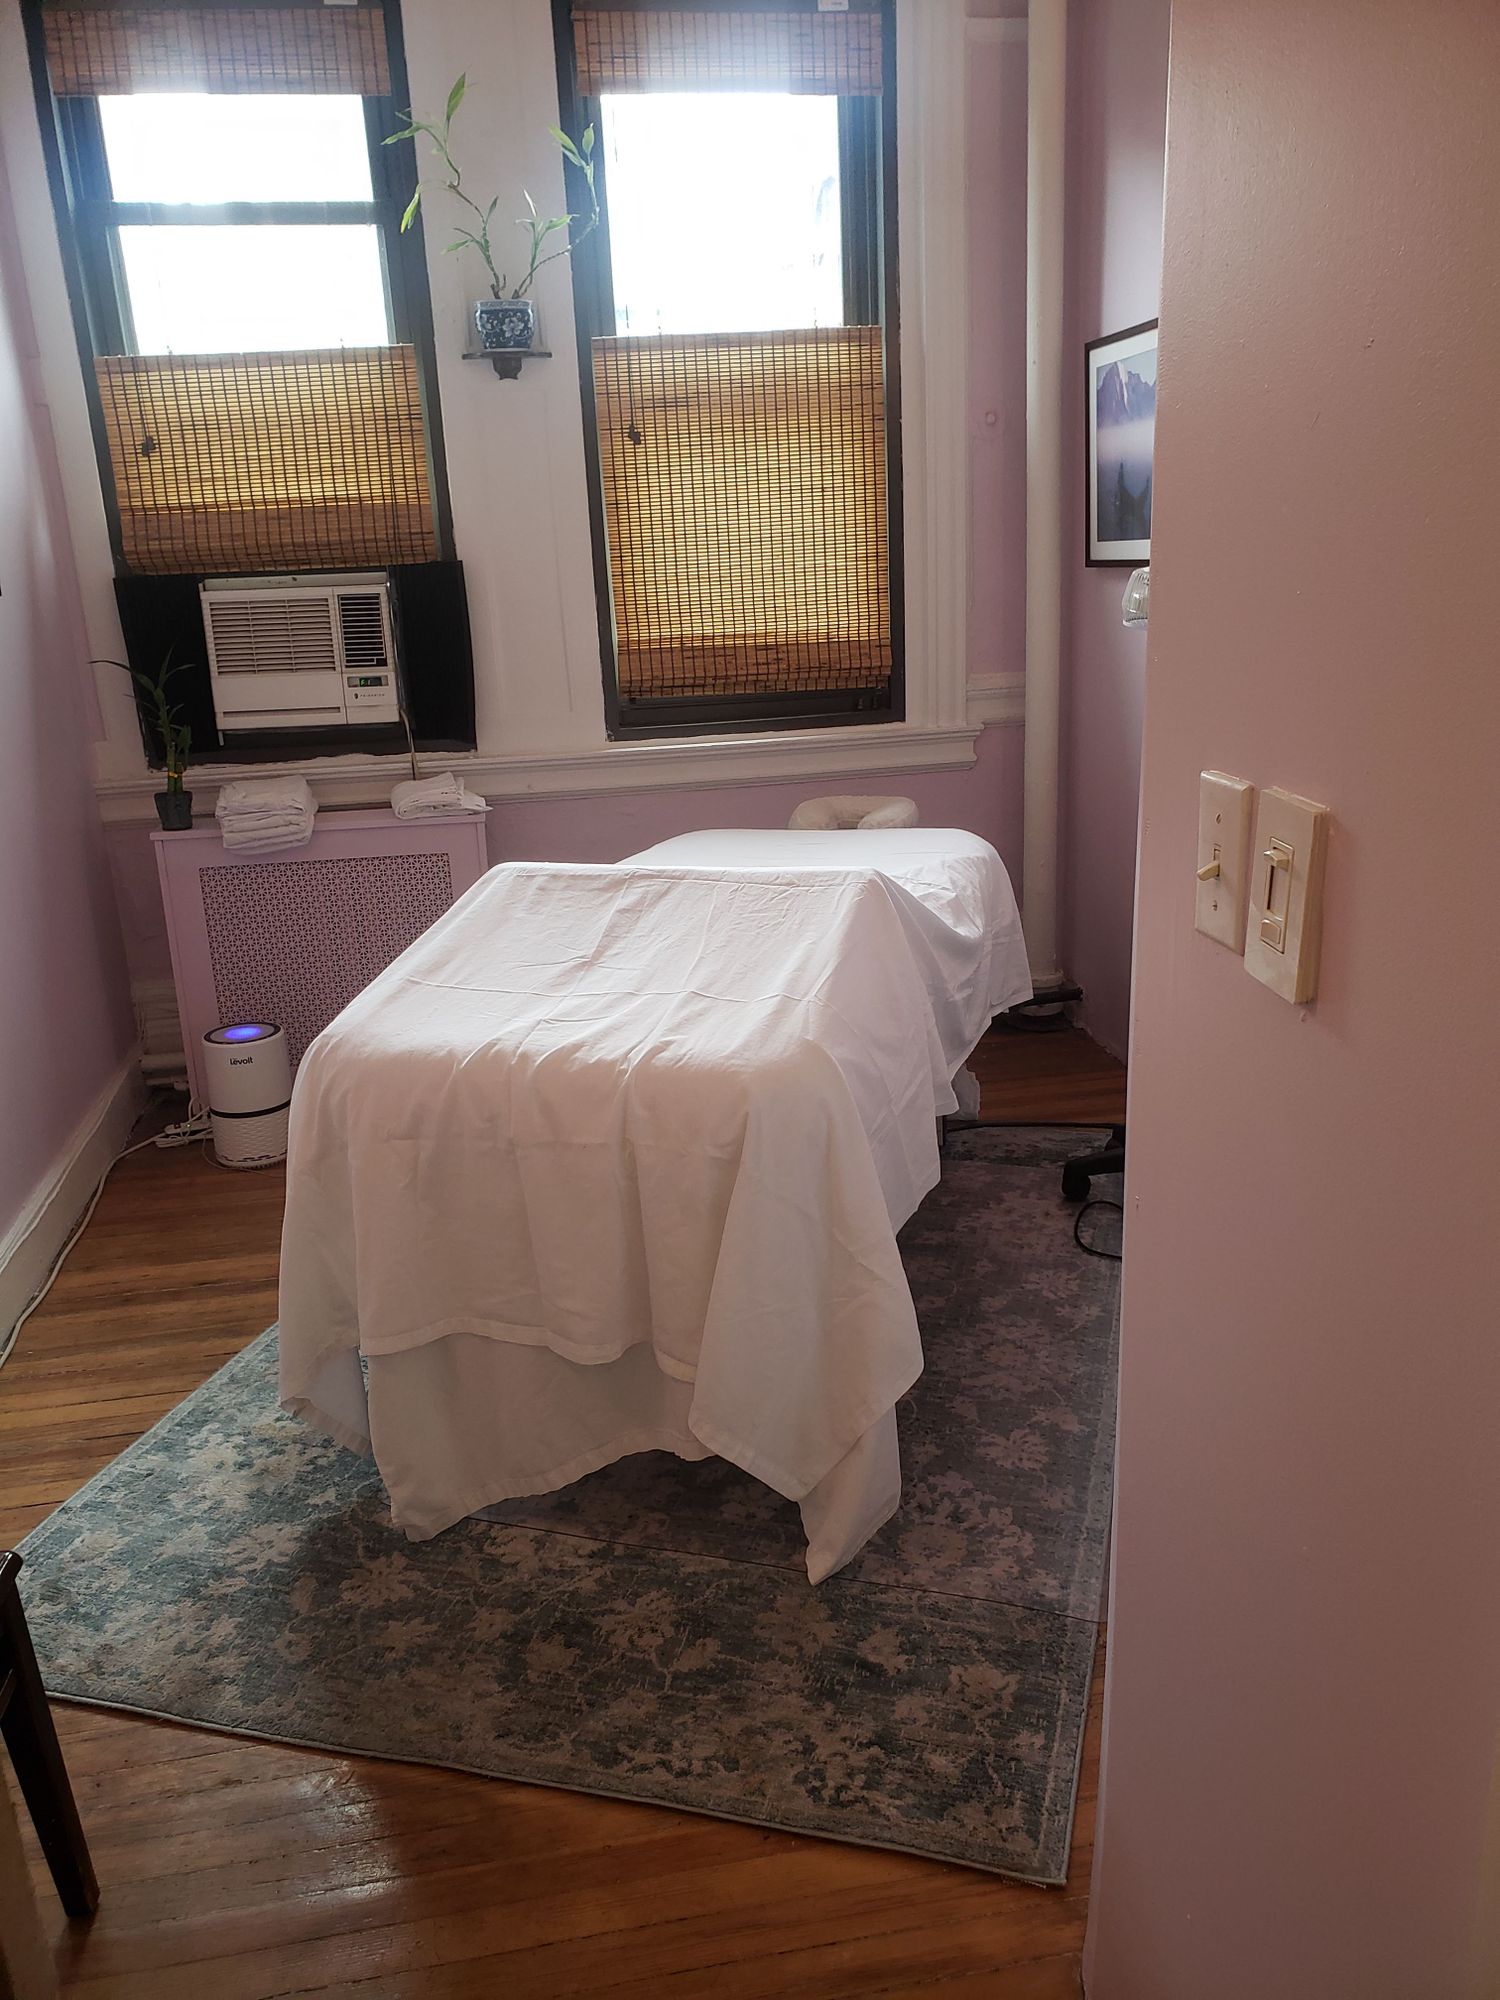 Gallery Photo of My primary treatment room